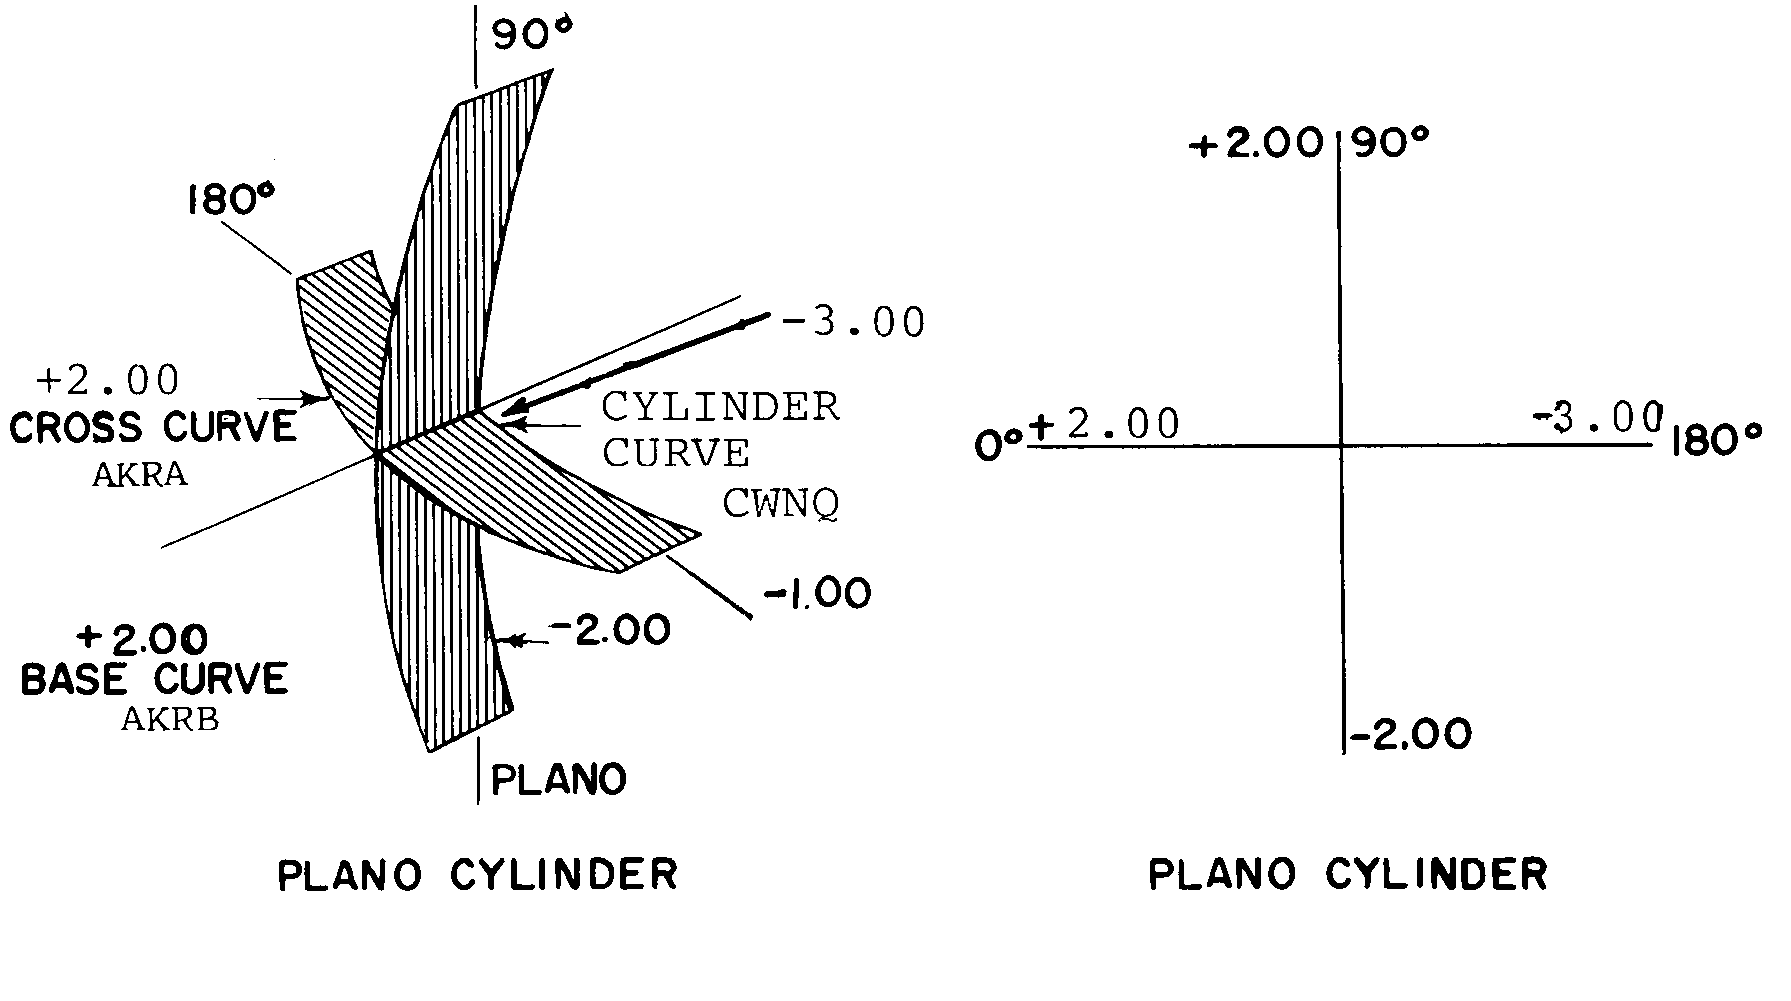 PLANO CYLINDER style nsn 6540-01-102-4301